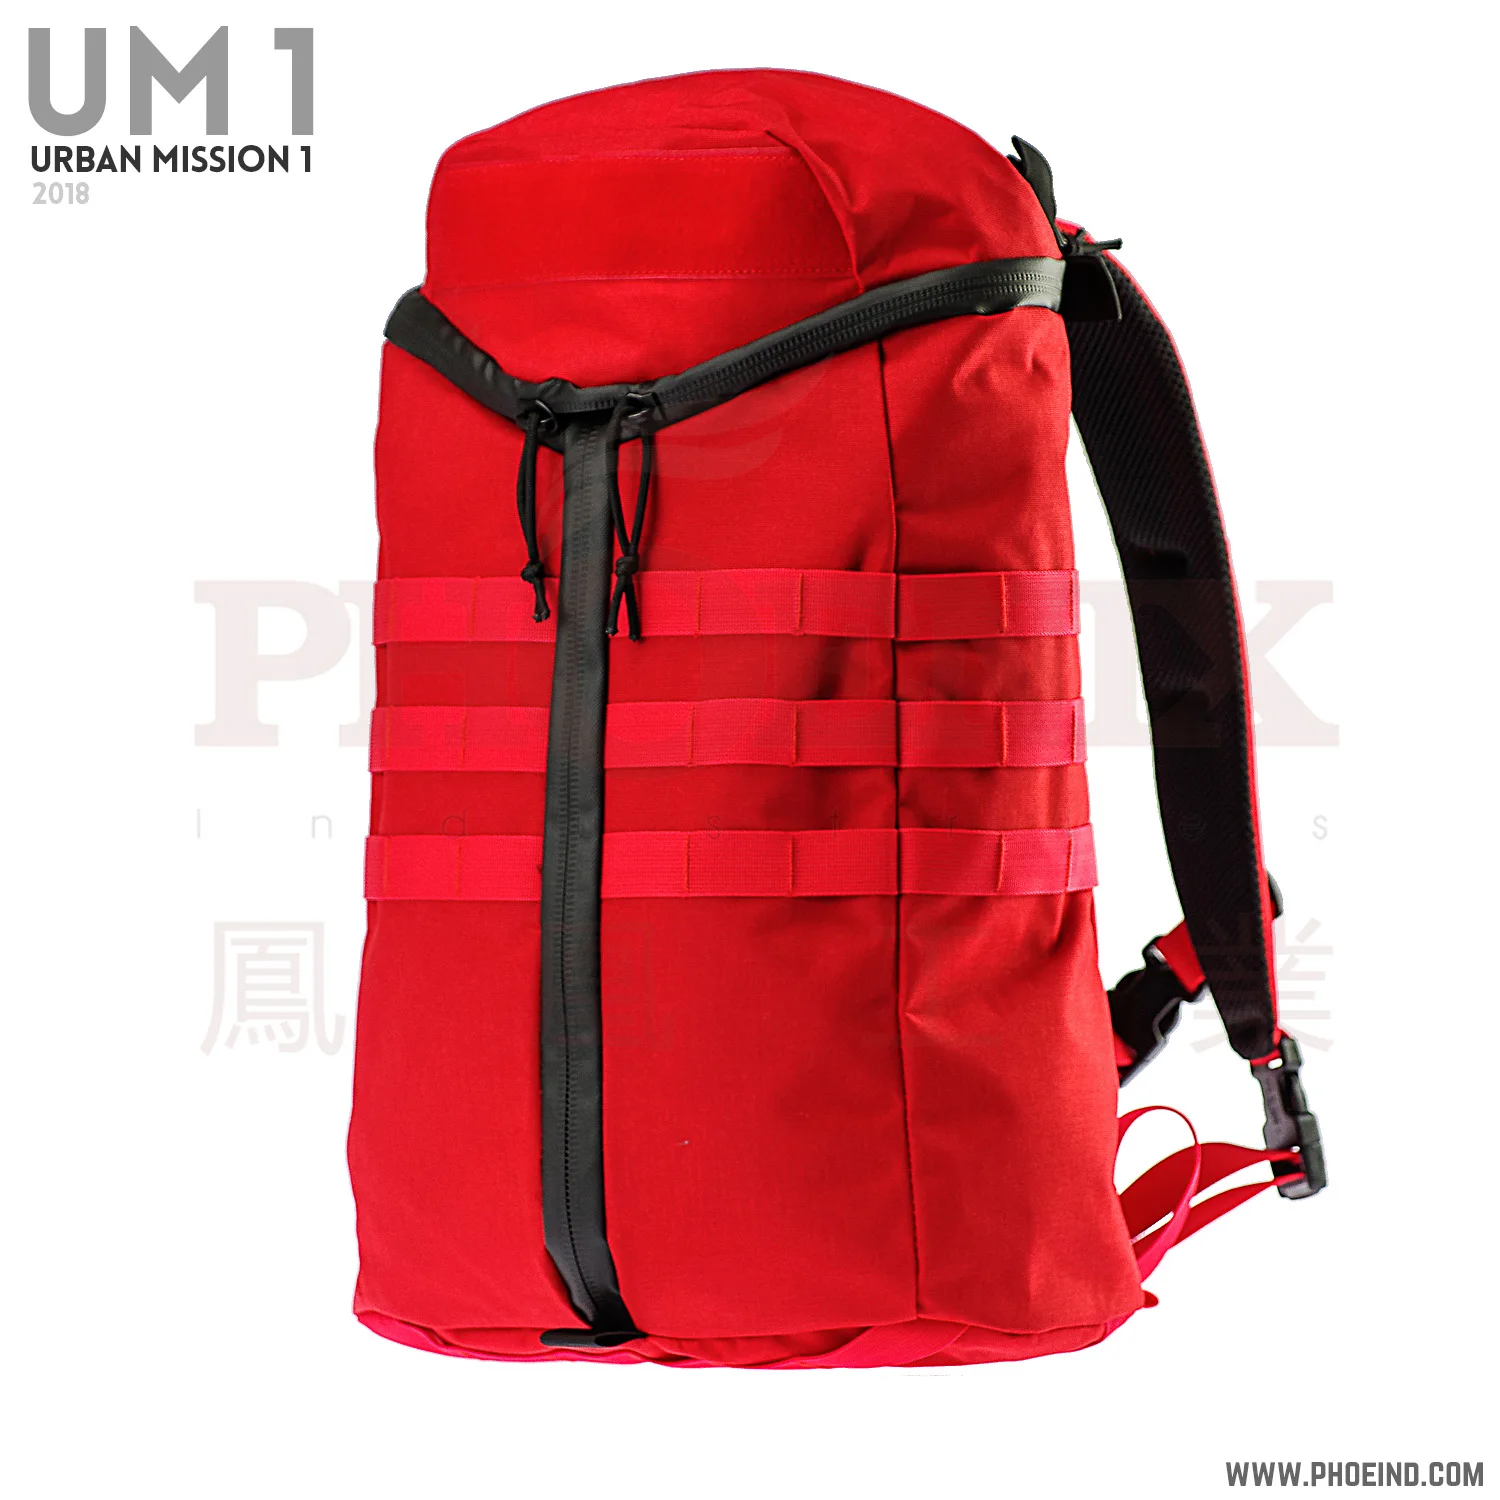 UM1 Urban Commuting One Day Backpack Outdoor Tactical Sports Hiking Camping 20L Multifunctional Backpack